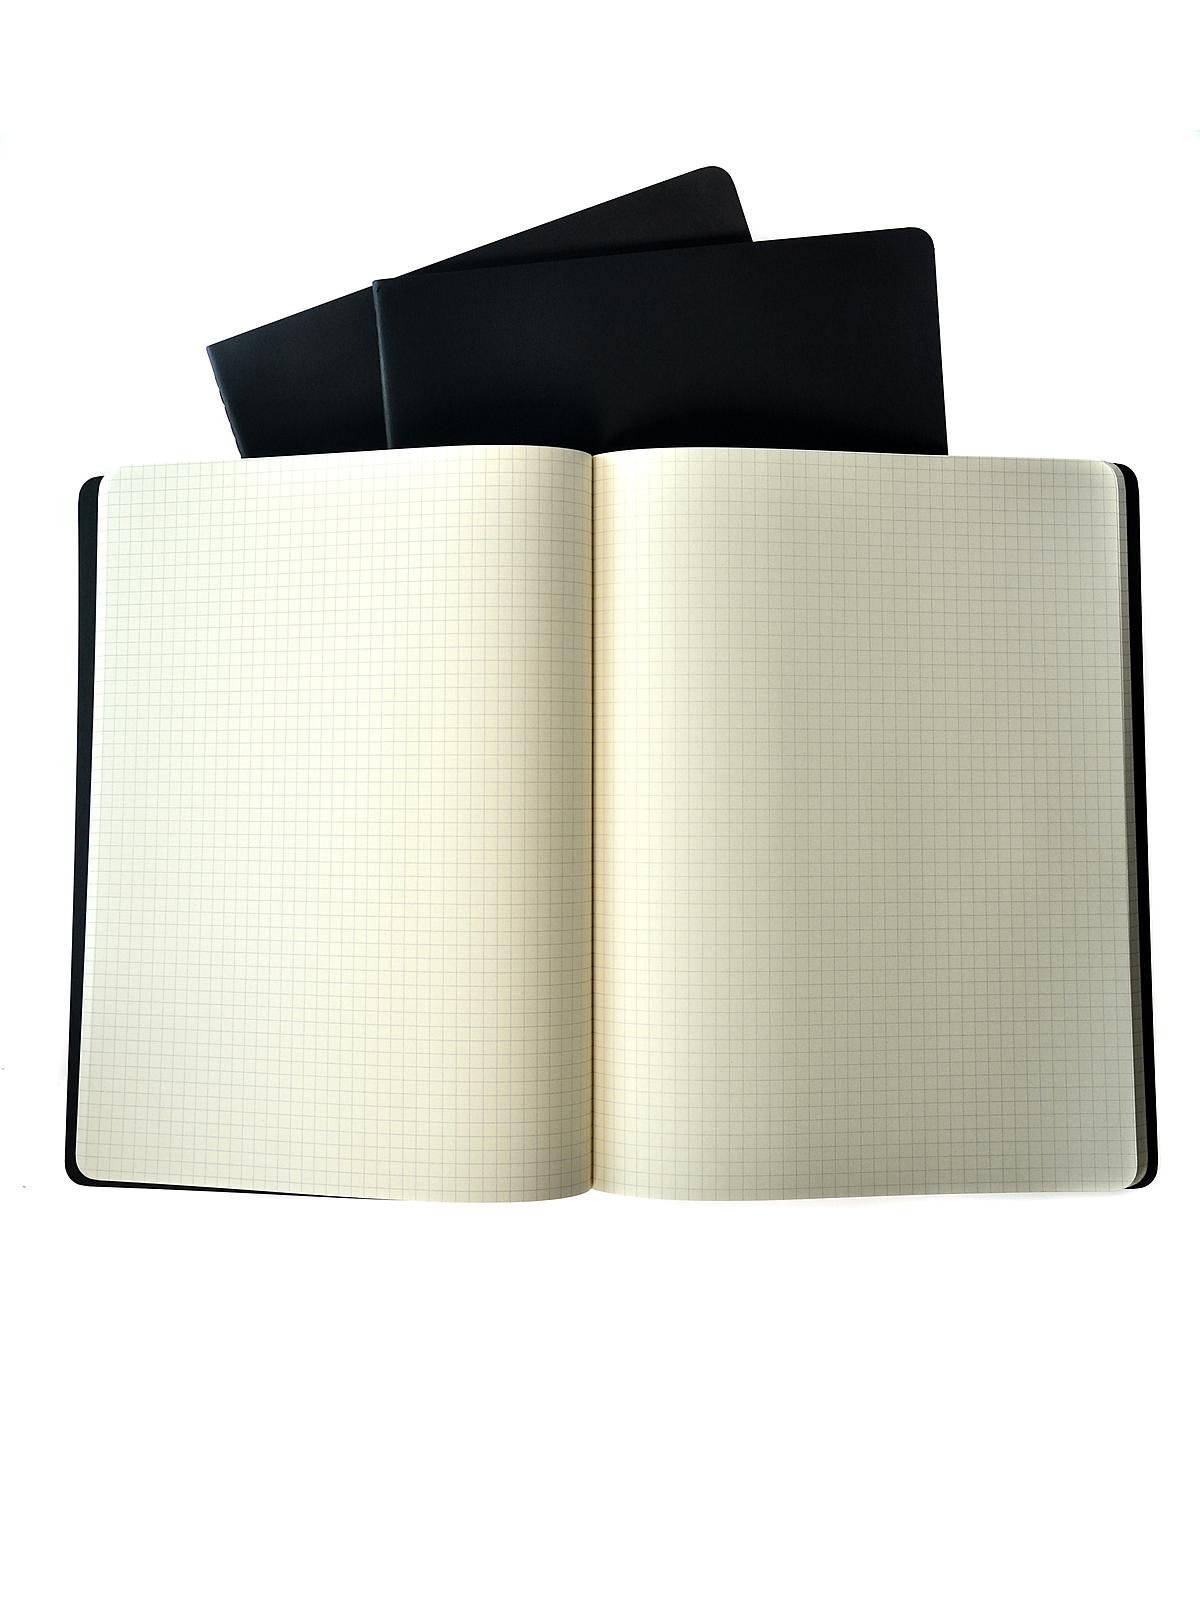 Cahier Journals Black, Graph 8 1 2 In. X 11 In. Pack Of 3, 120 Pages Each